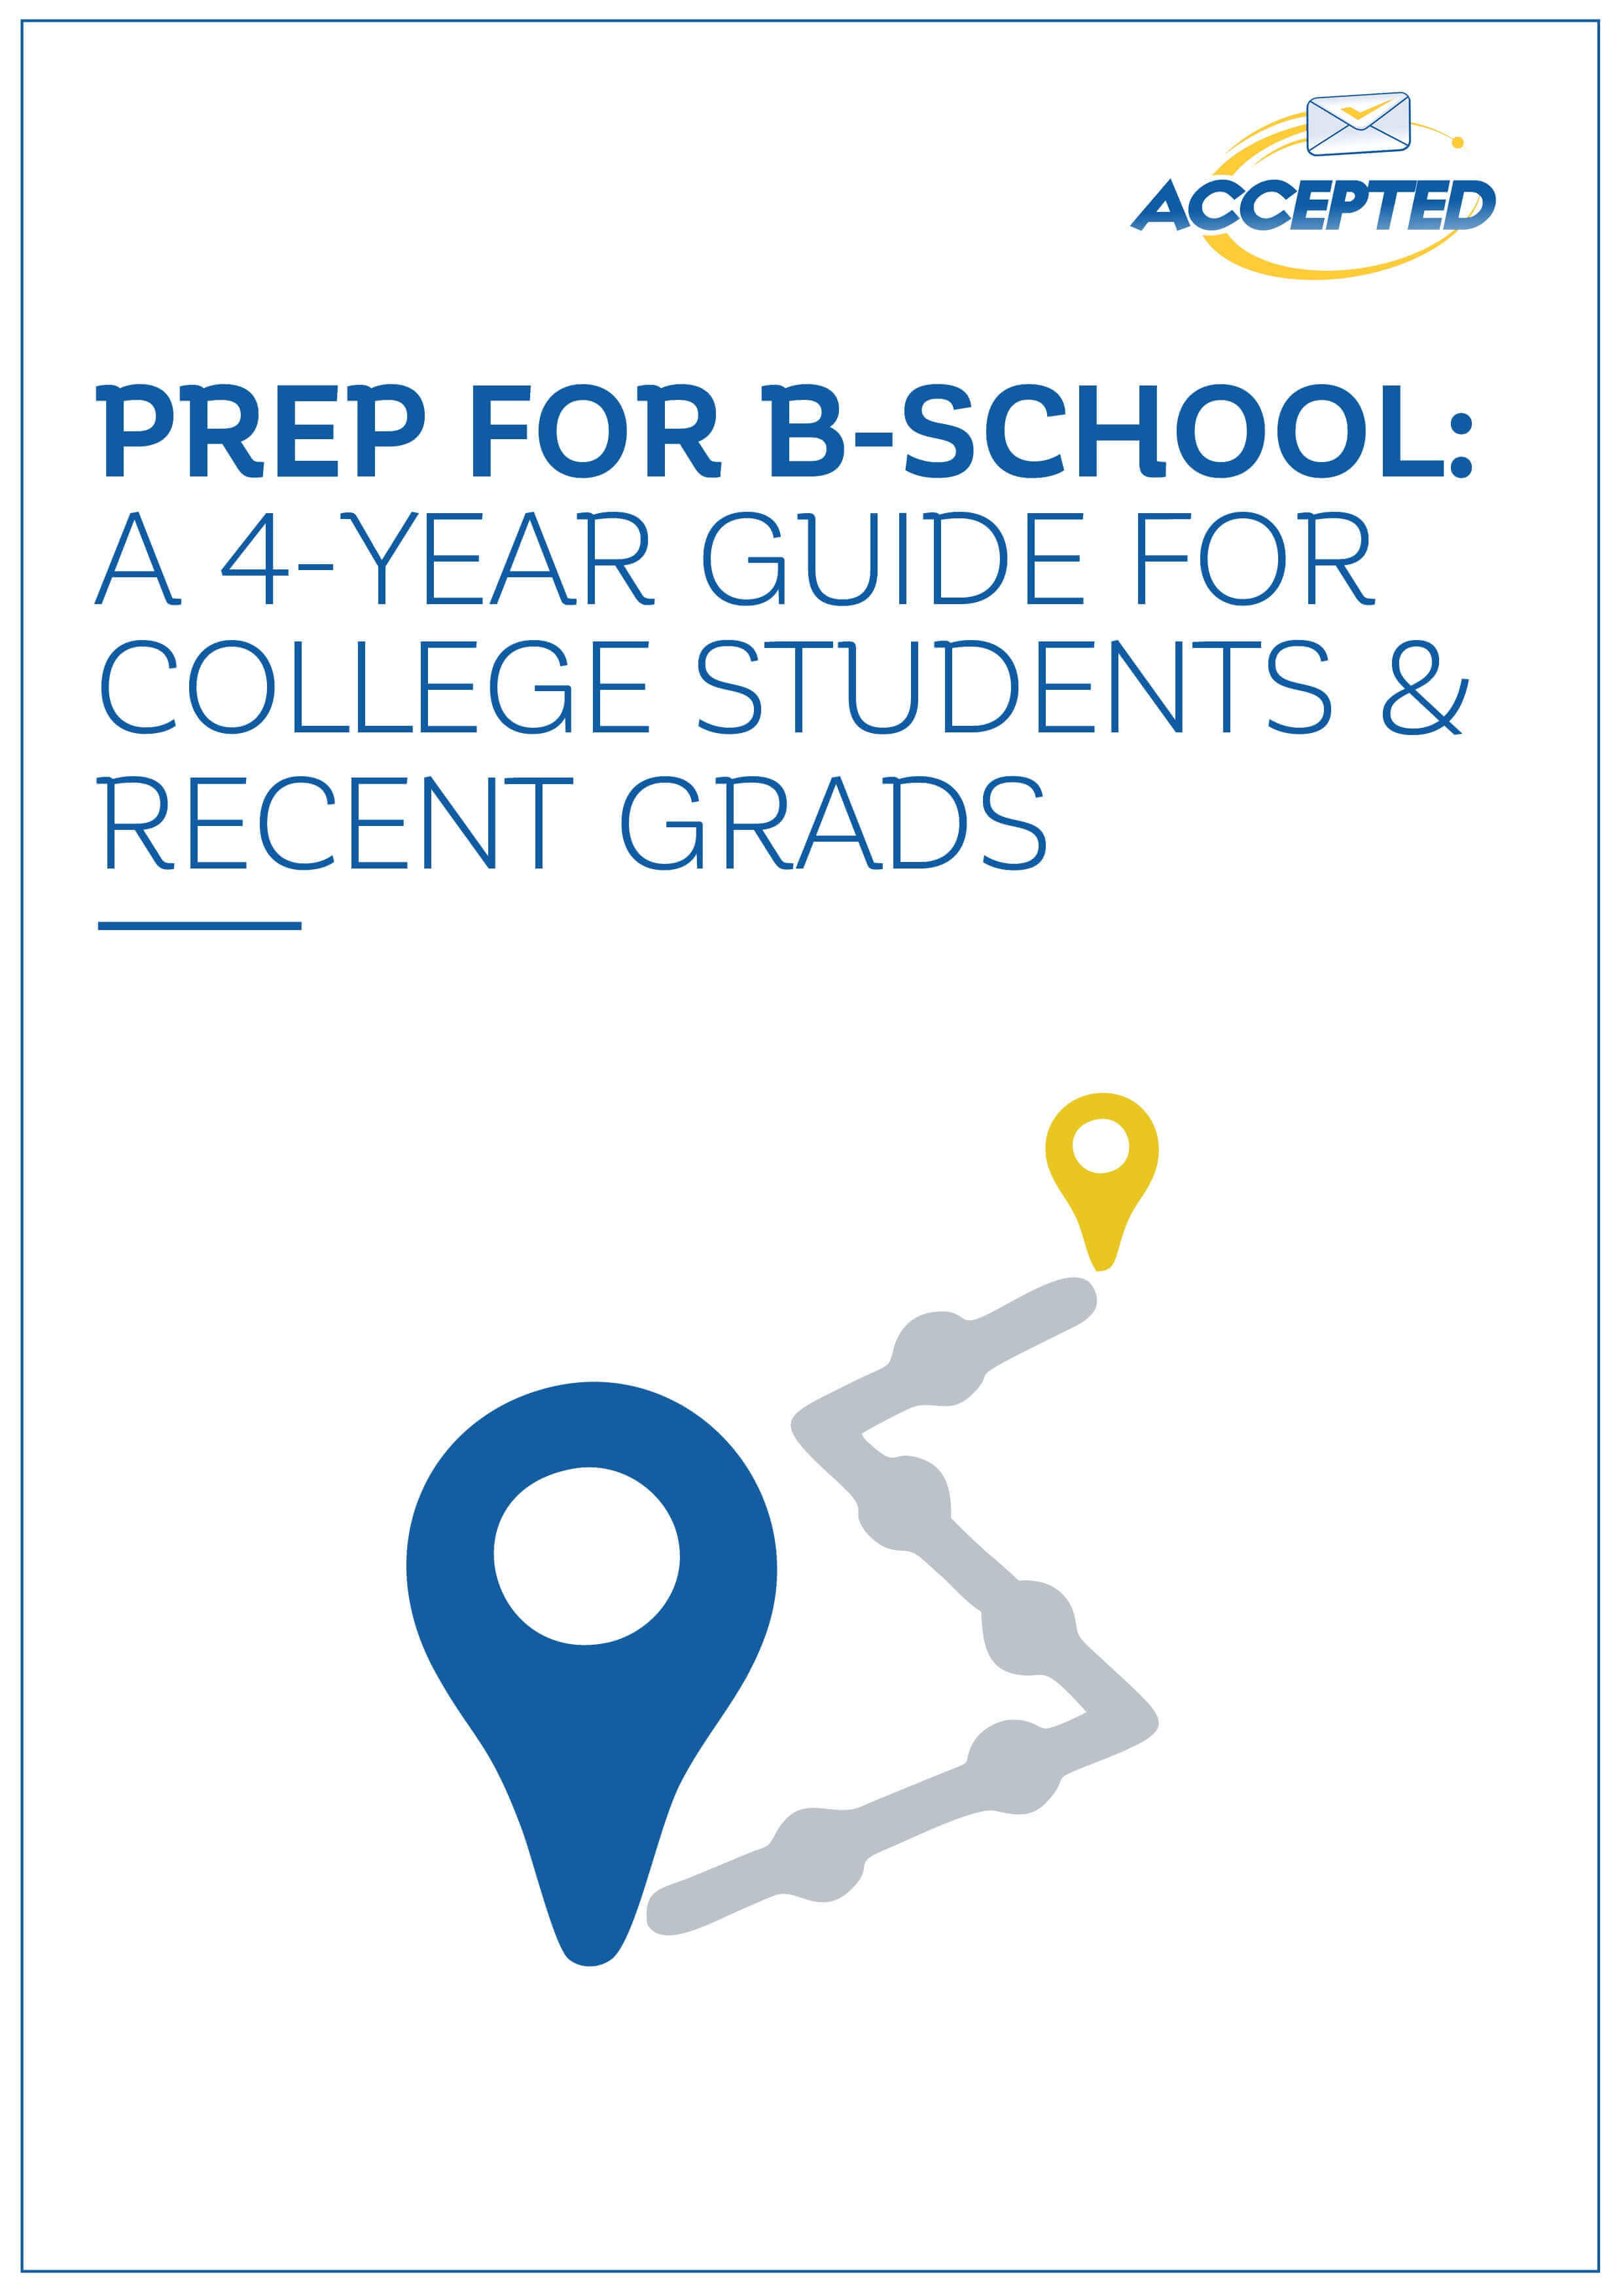 Prep_for_B-School_Year_Guide_for_College_Students_and_Recent_Grads.jpg